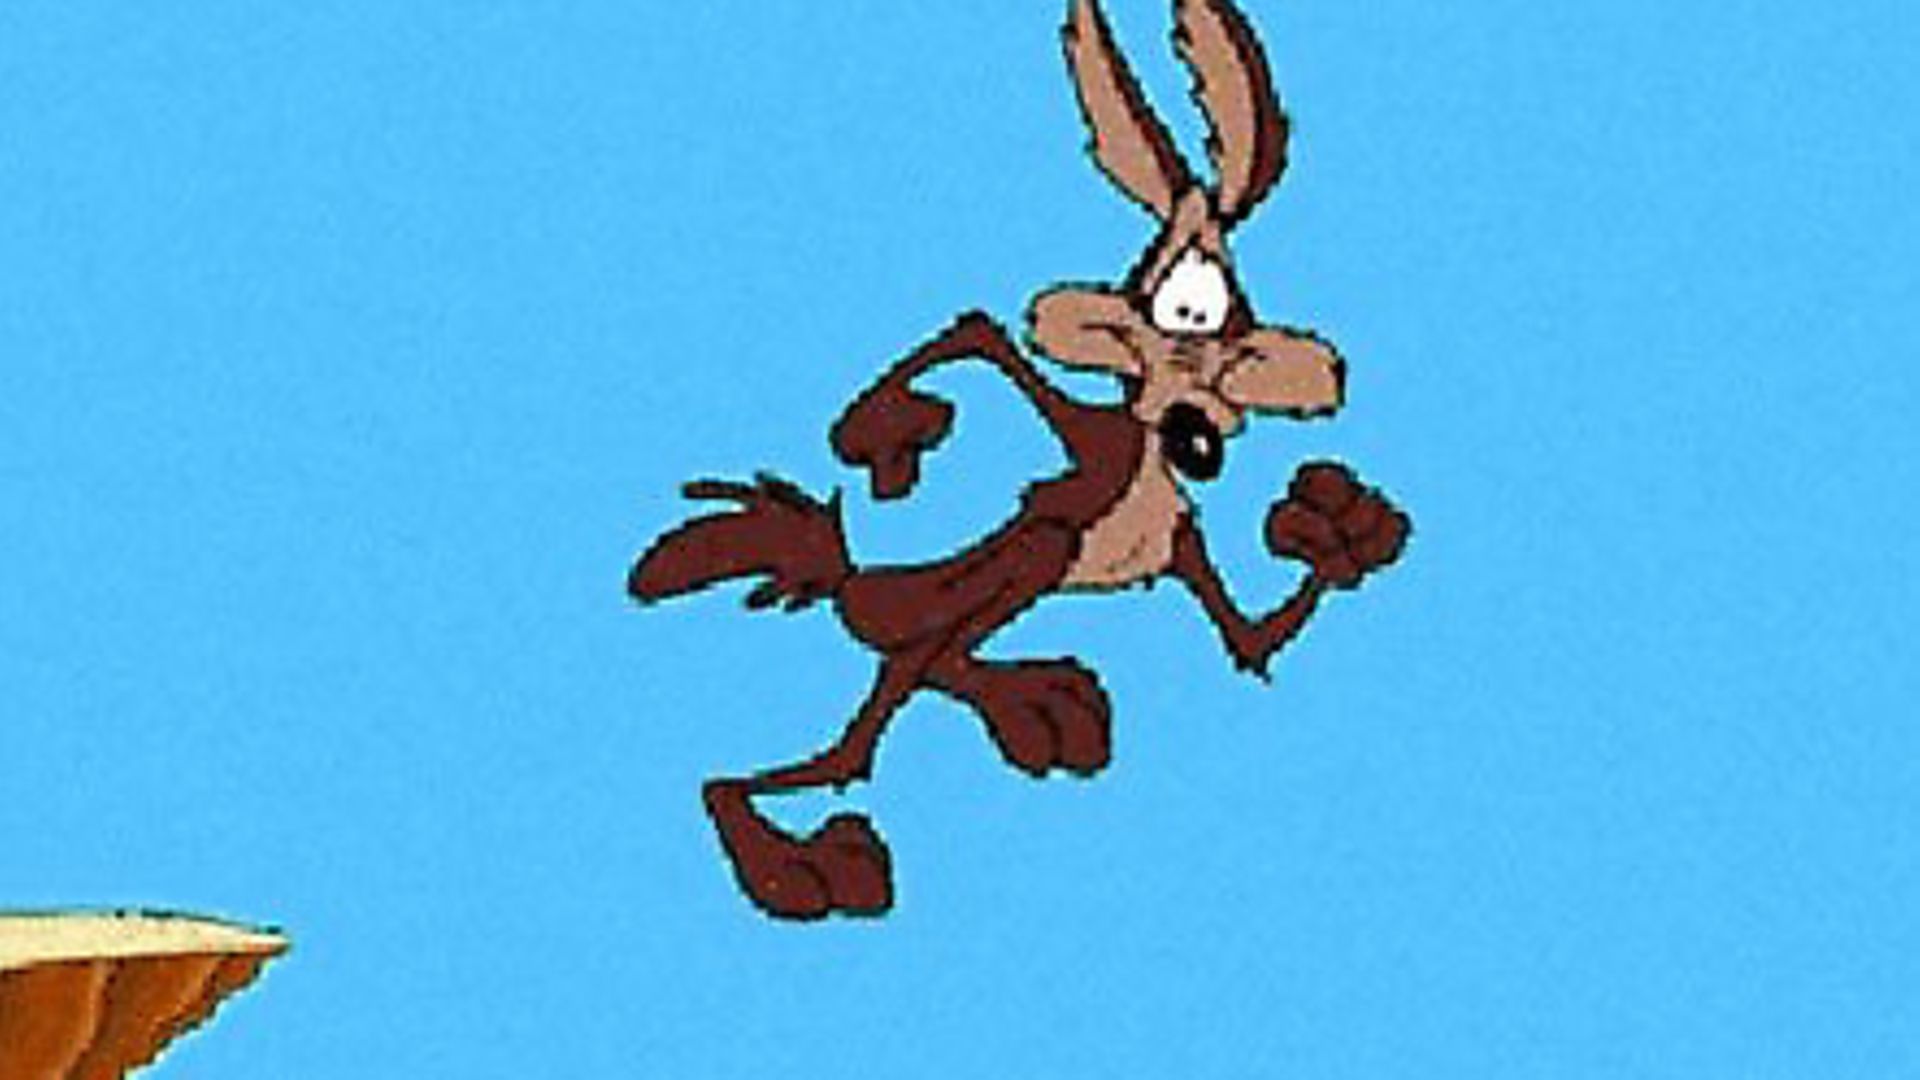 Much like Wile E. Coyote, Britain's dash towards Brexit means it is fast running out of road. - Credit: Archant